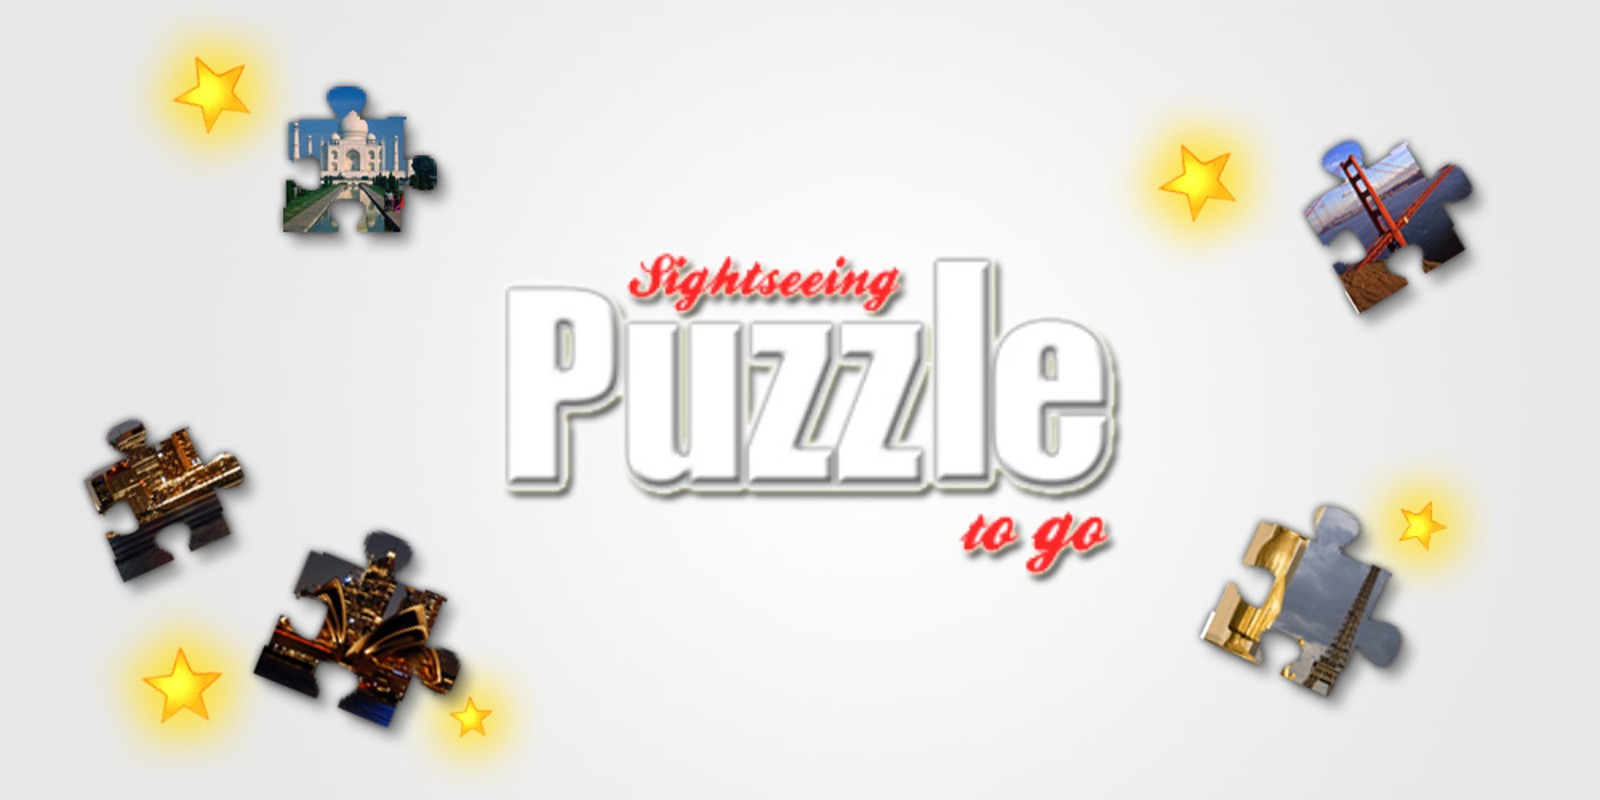 Puzzle to Go Sightseeing